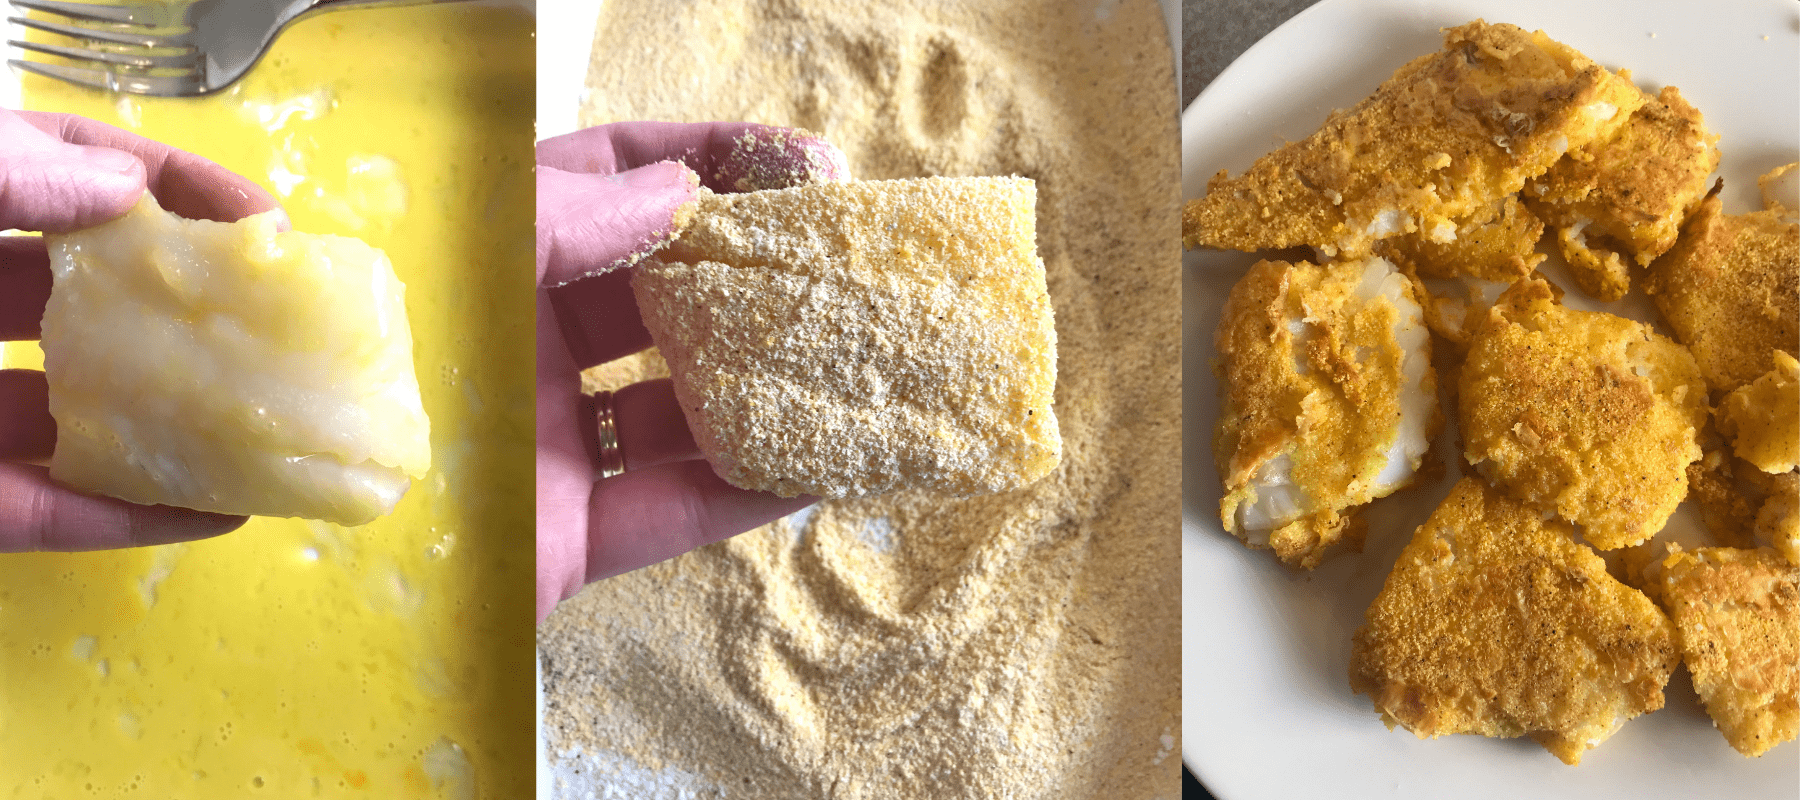 How to make delicious cornmeal crusted cod that is just 3 WW FreeStyle SmartPoints per serving!